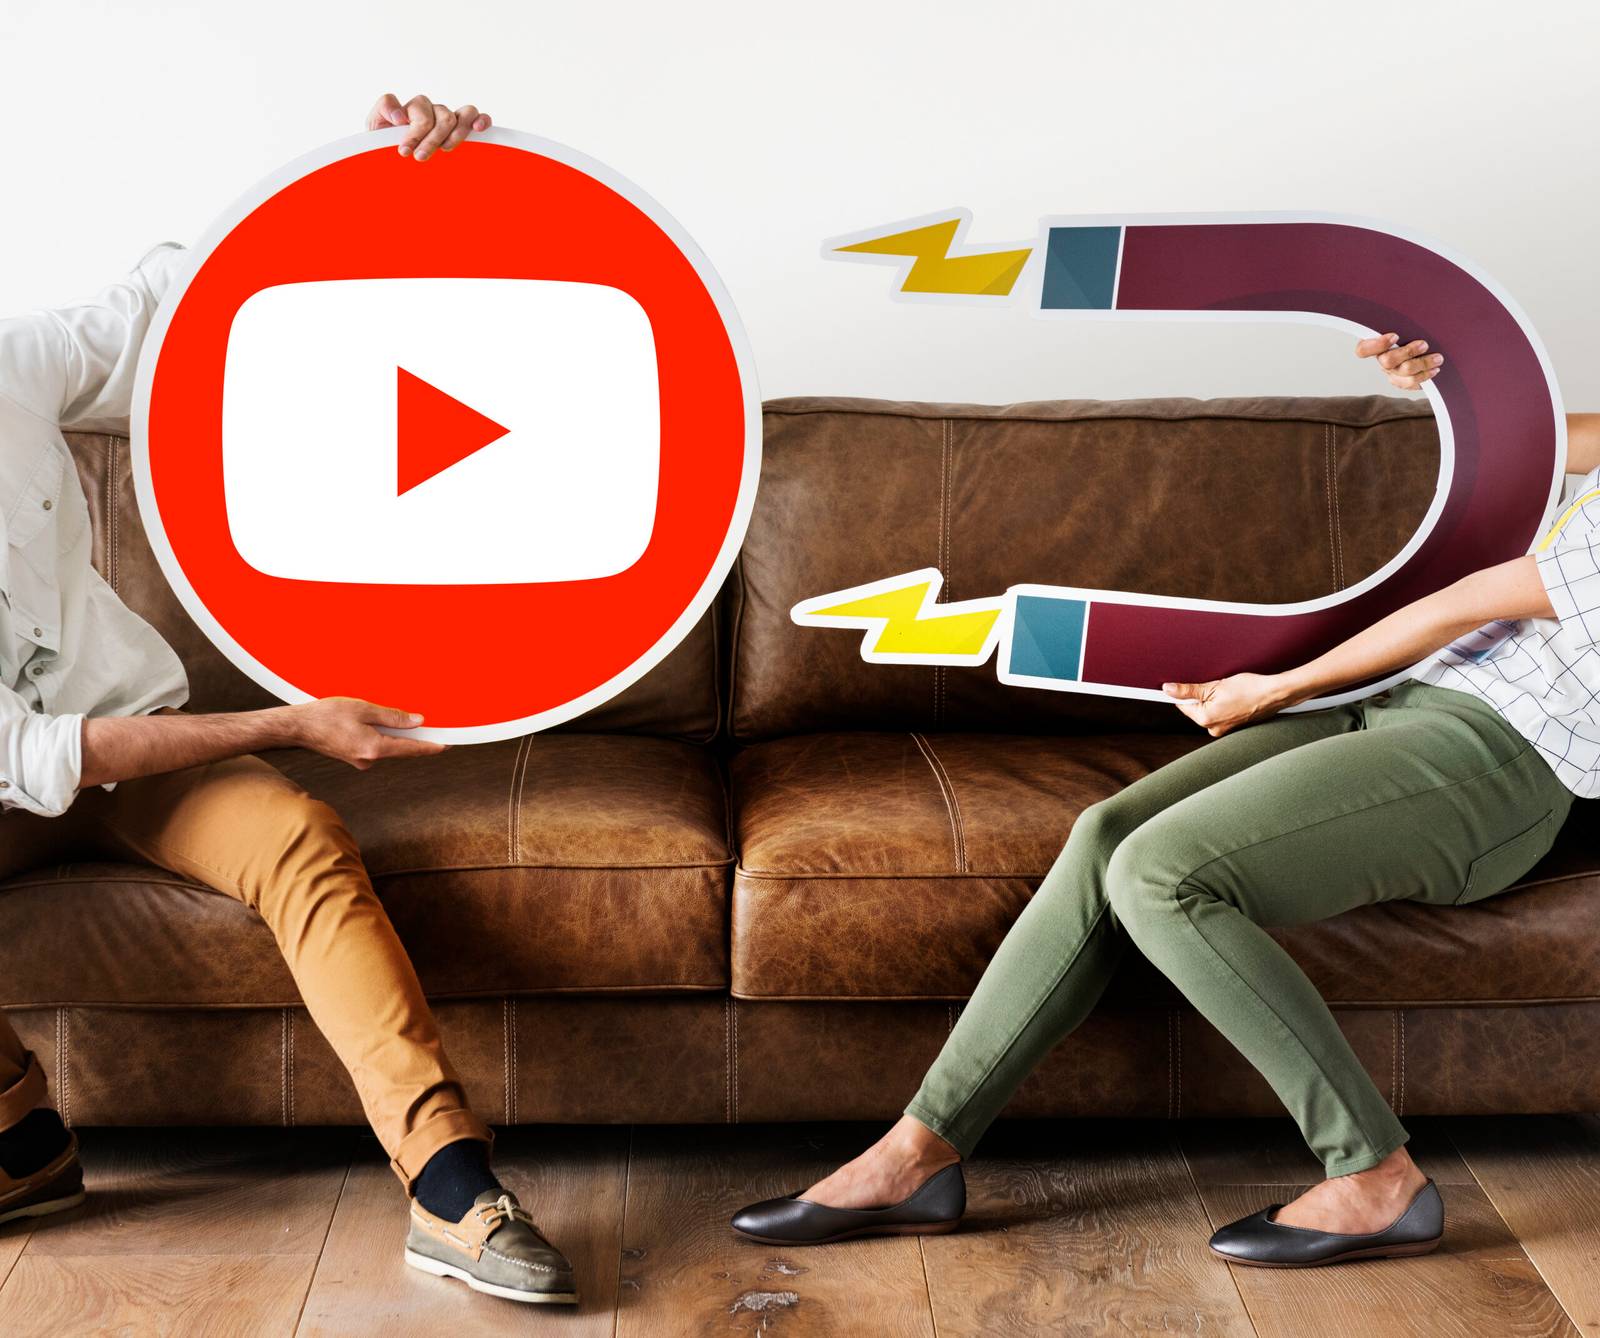 Video SEO: Ranking Your Videos on YouTube and Google